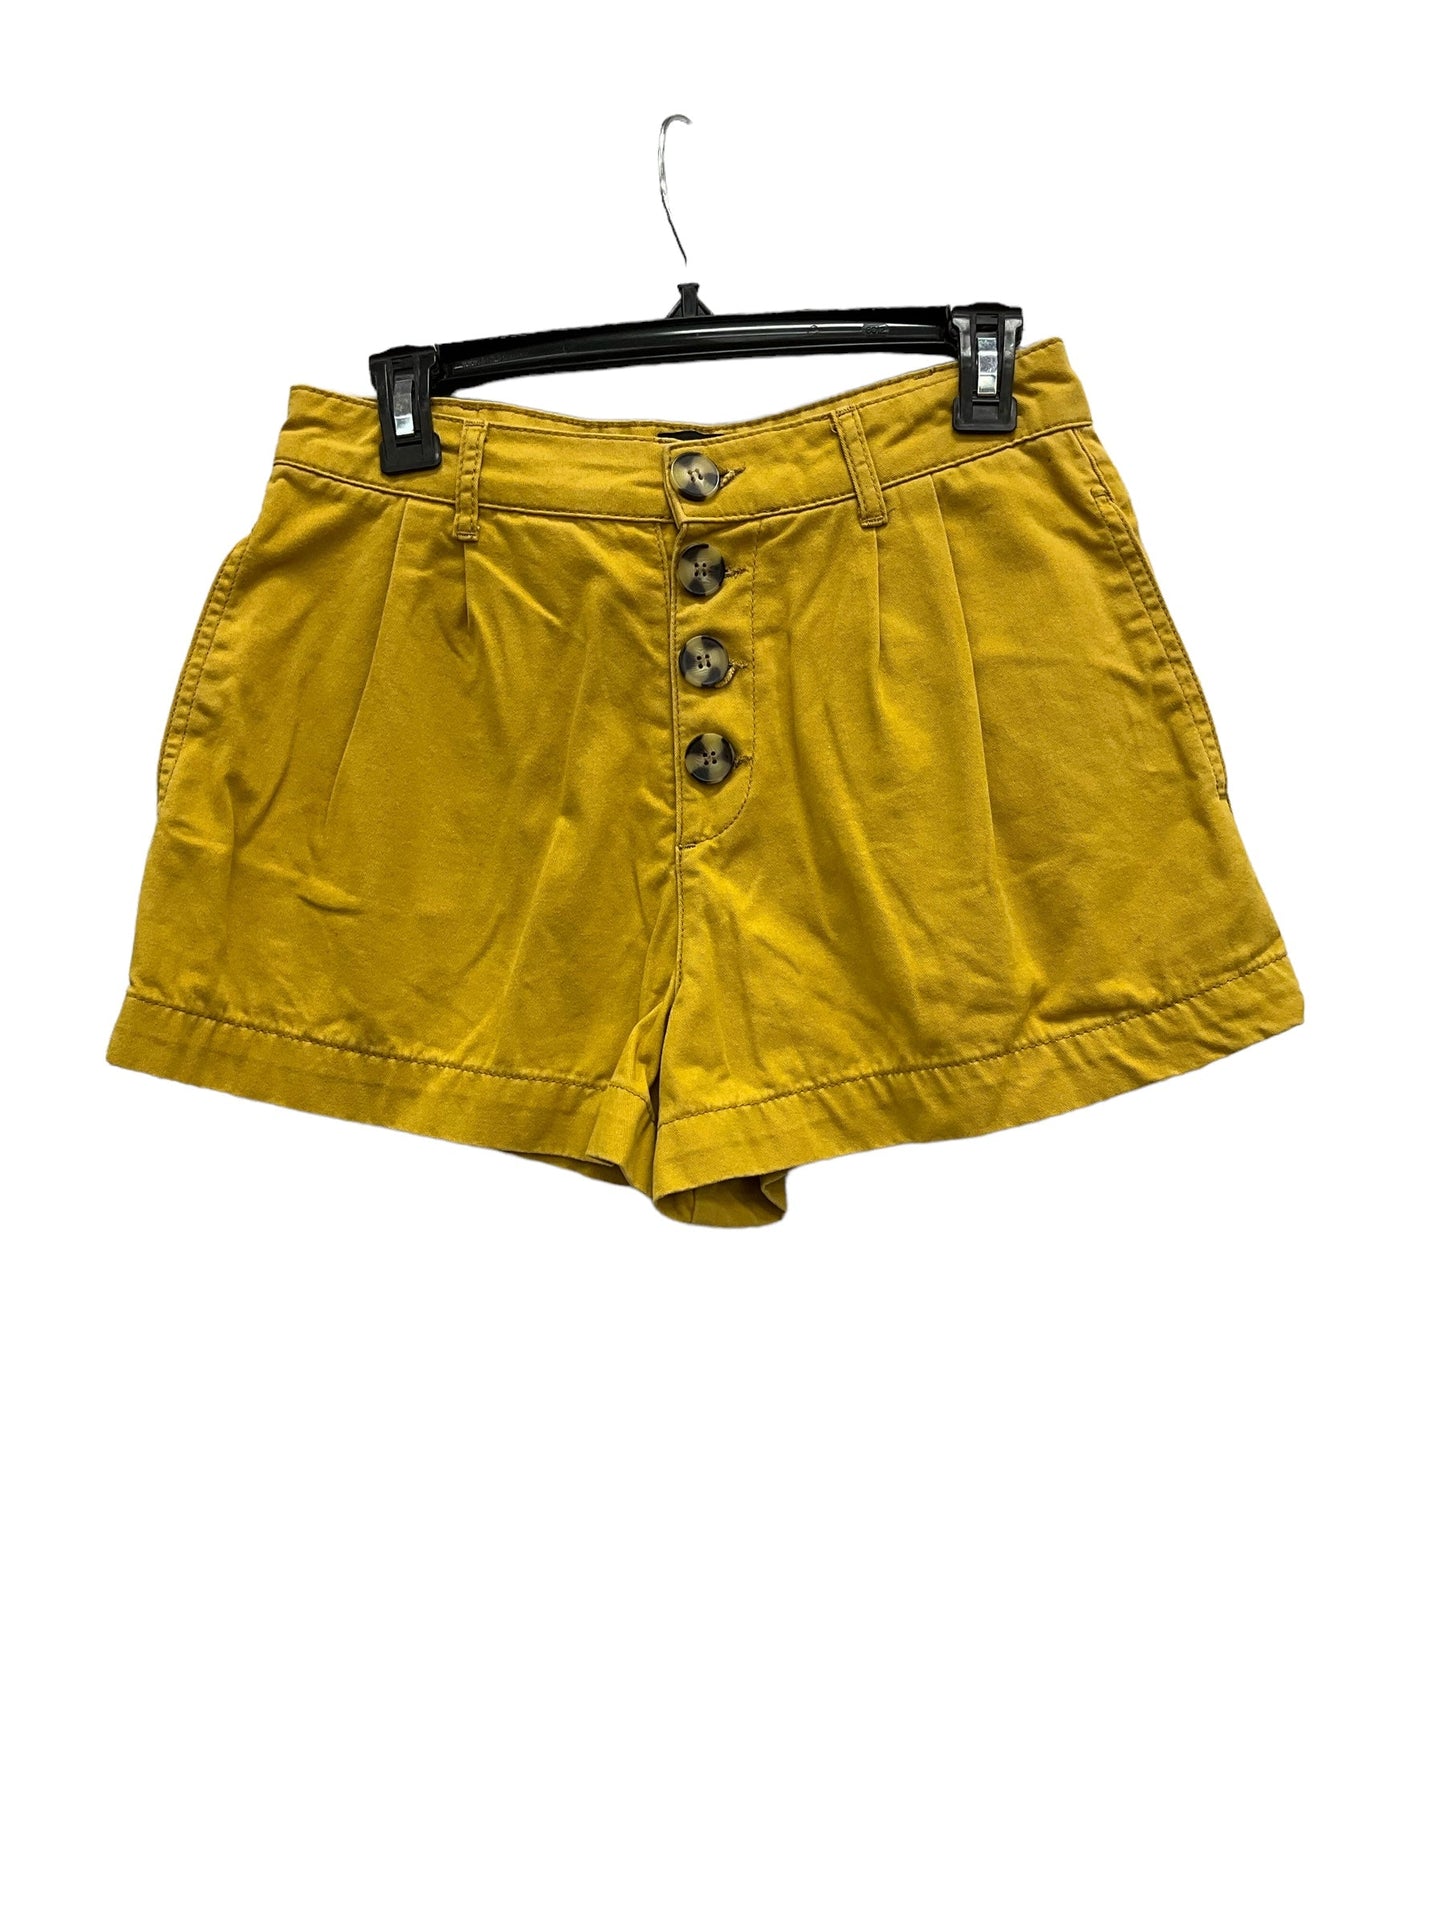 Shorts By Bdg  Size: 4